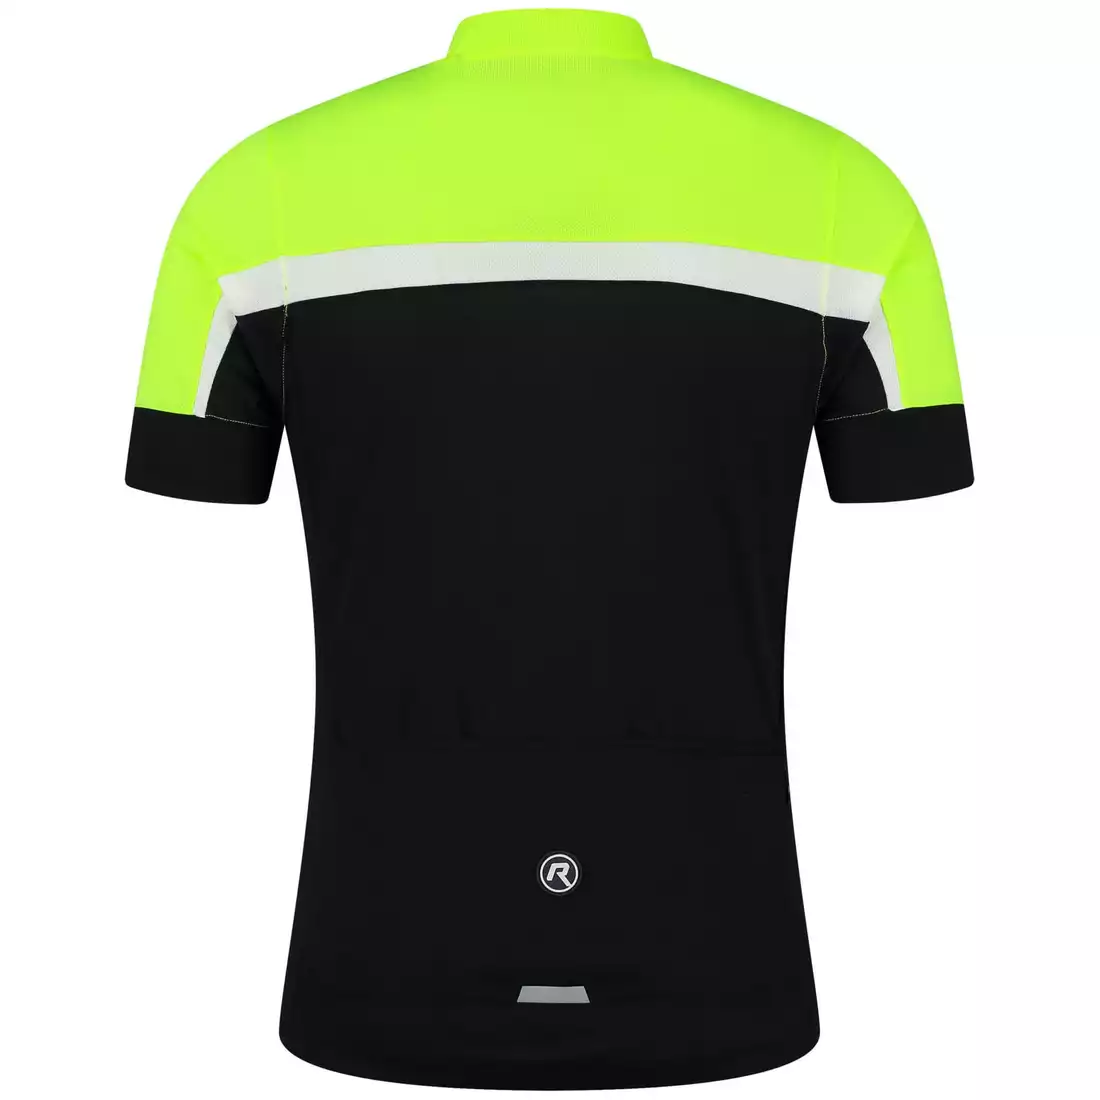 Rogelli COURSE men's cycling jersey, black and yellow